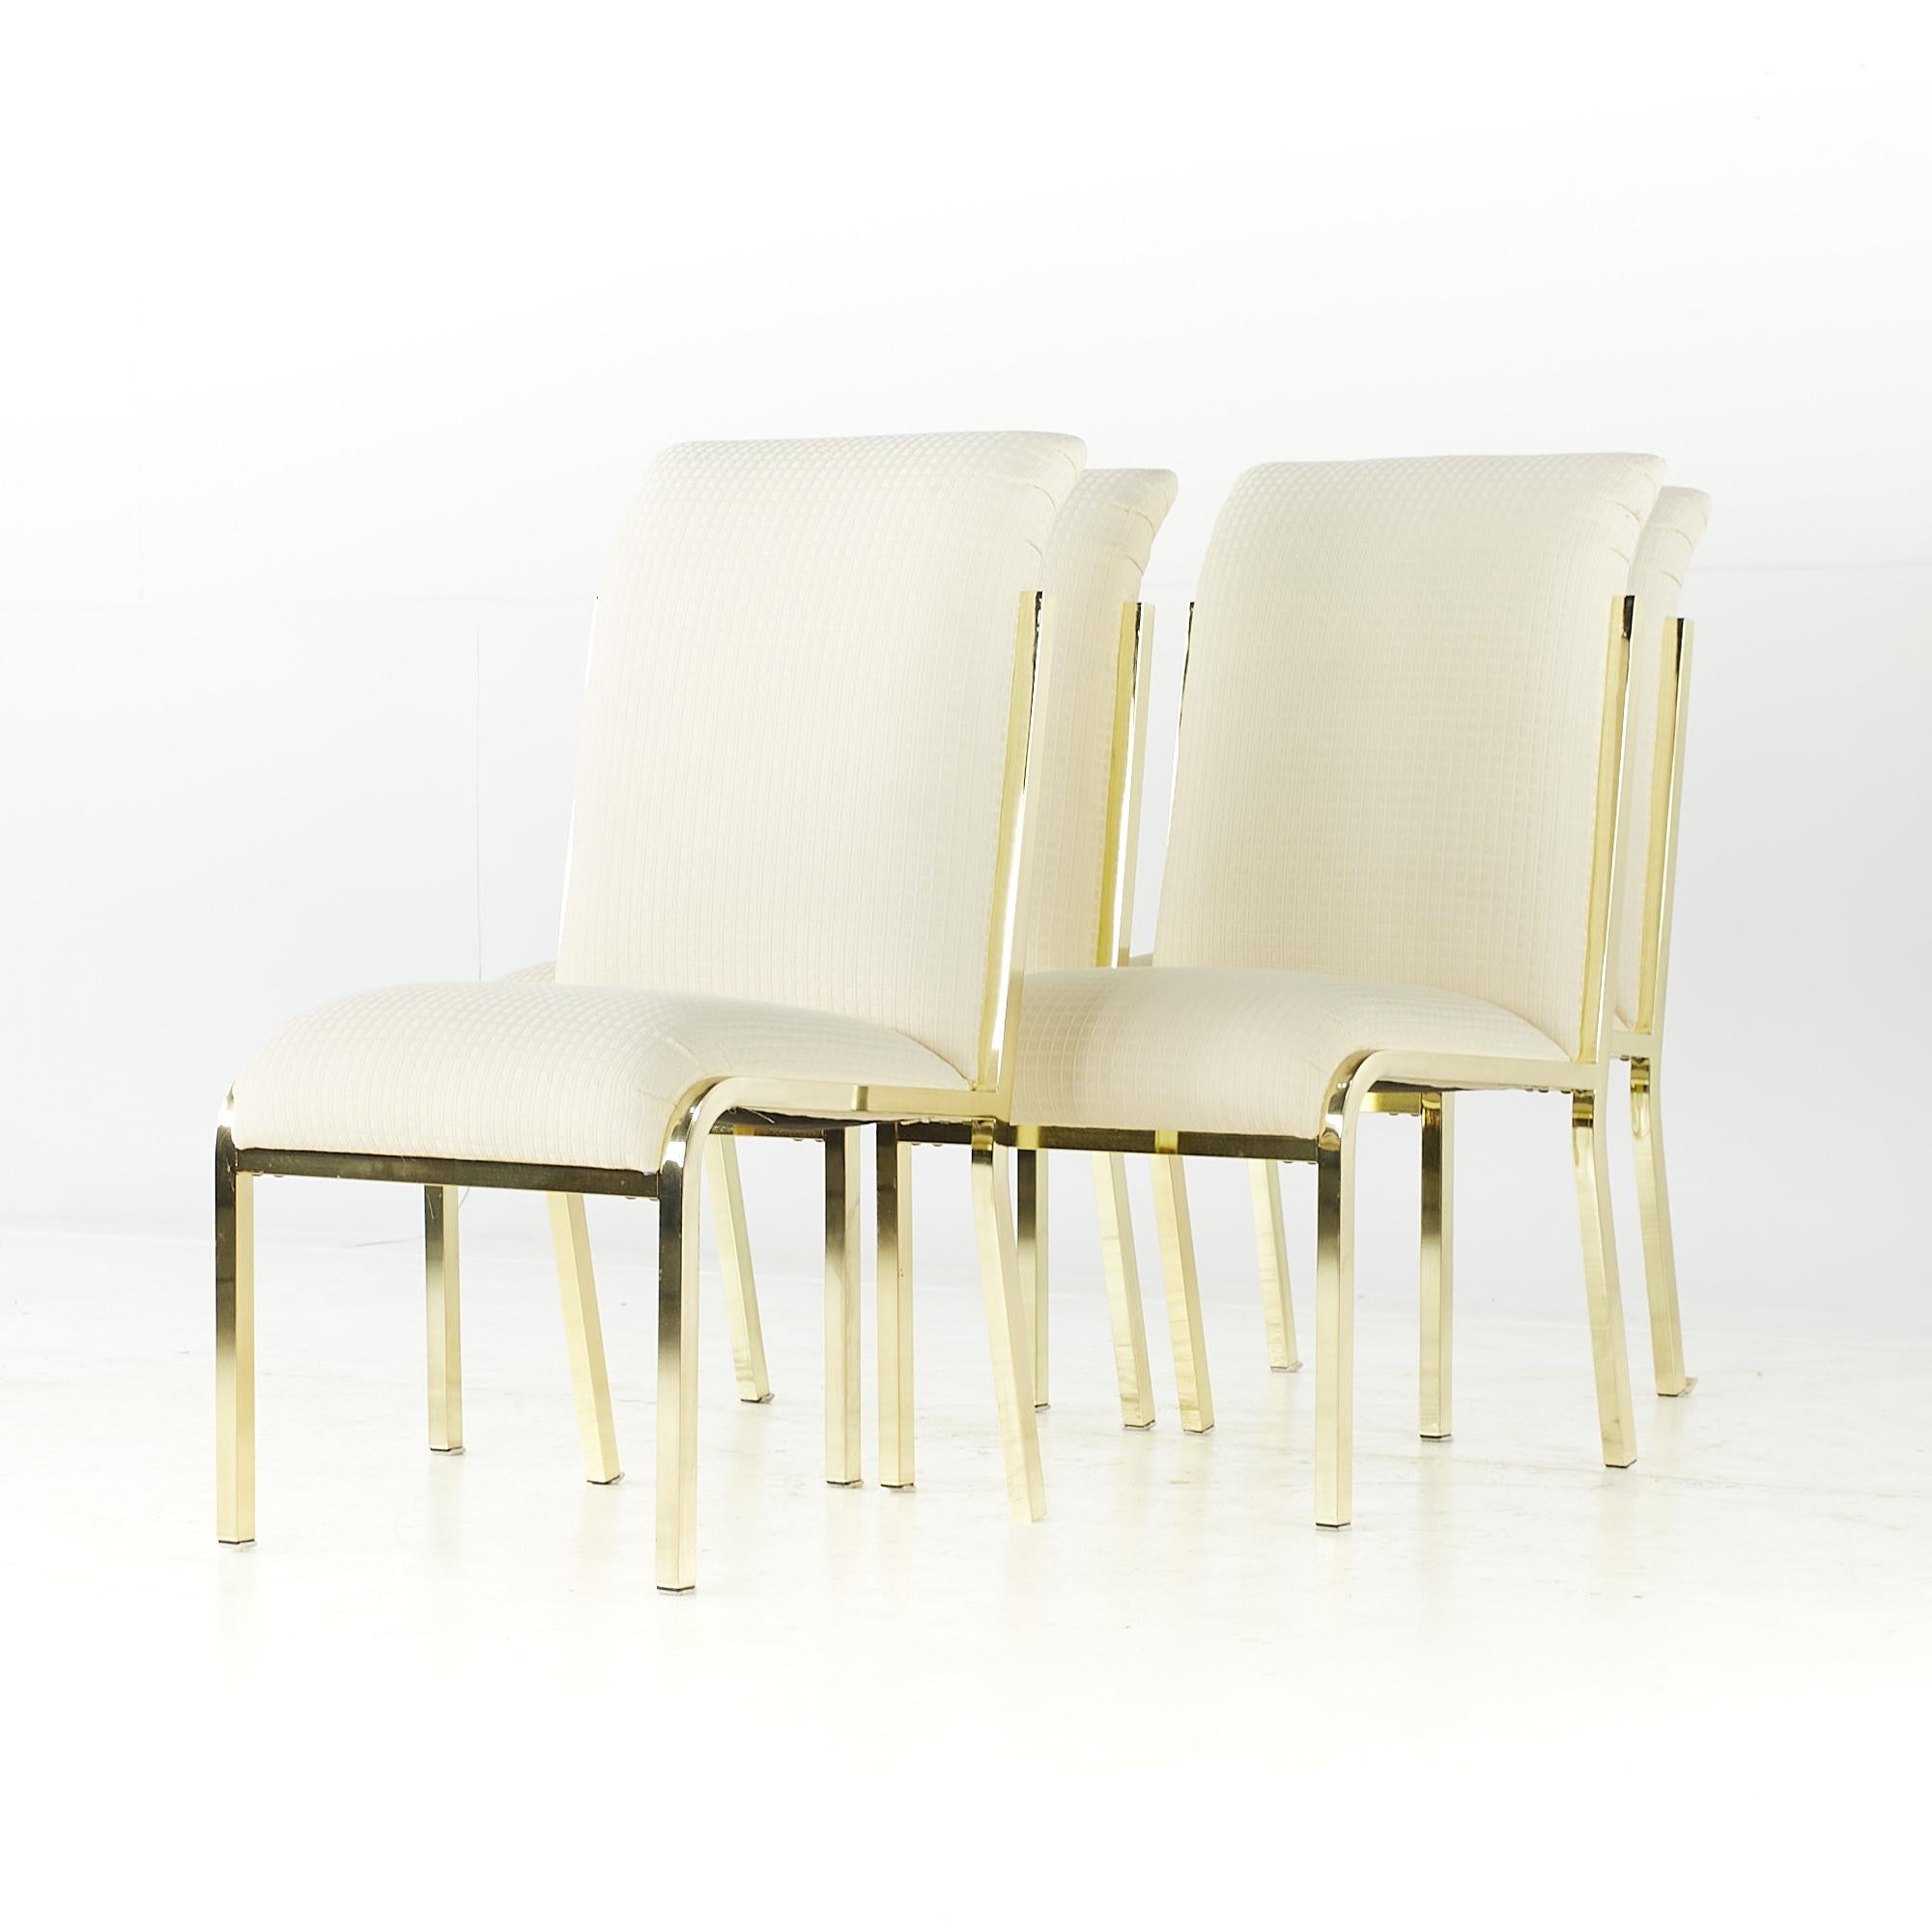 Mid-Century Modern Milo Baughman Style Mid Century Brass Dining Chairs - Set of 4 For Sale